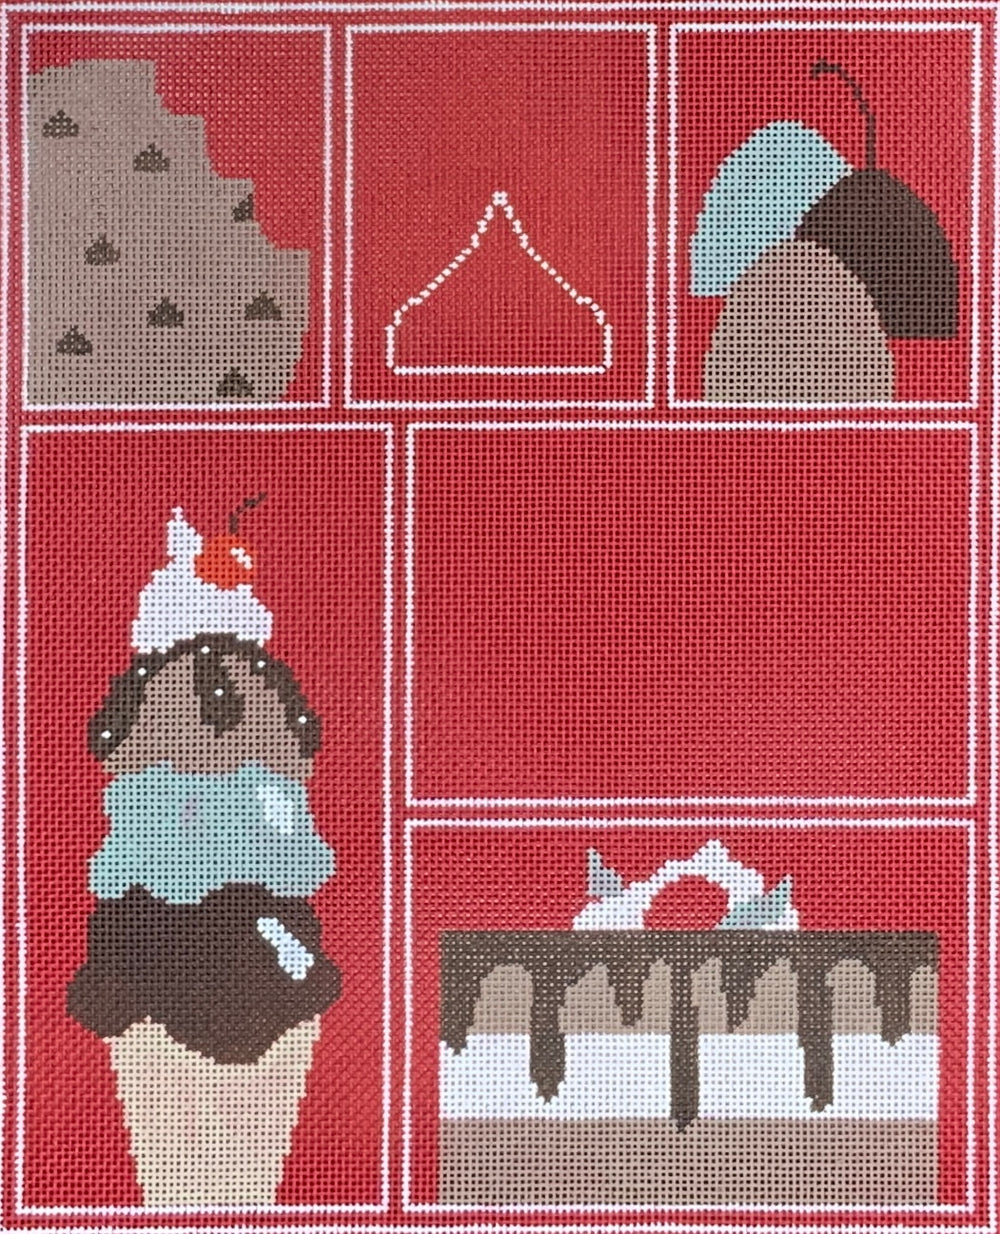 Chocolate Sampler with stitch guide